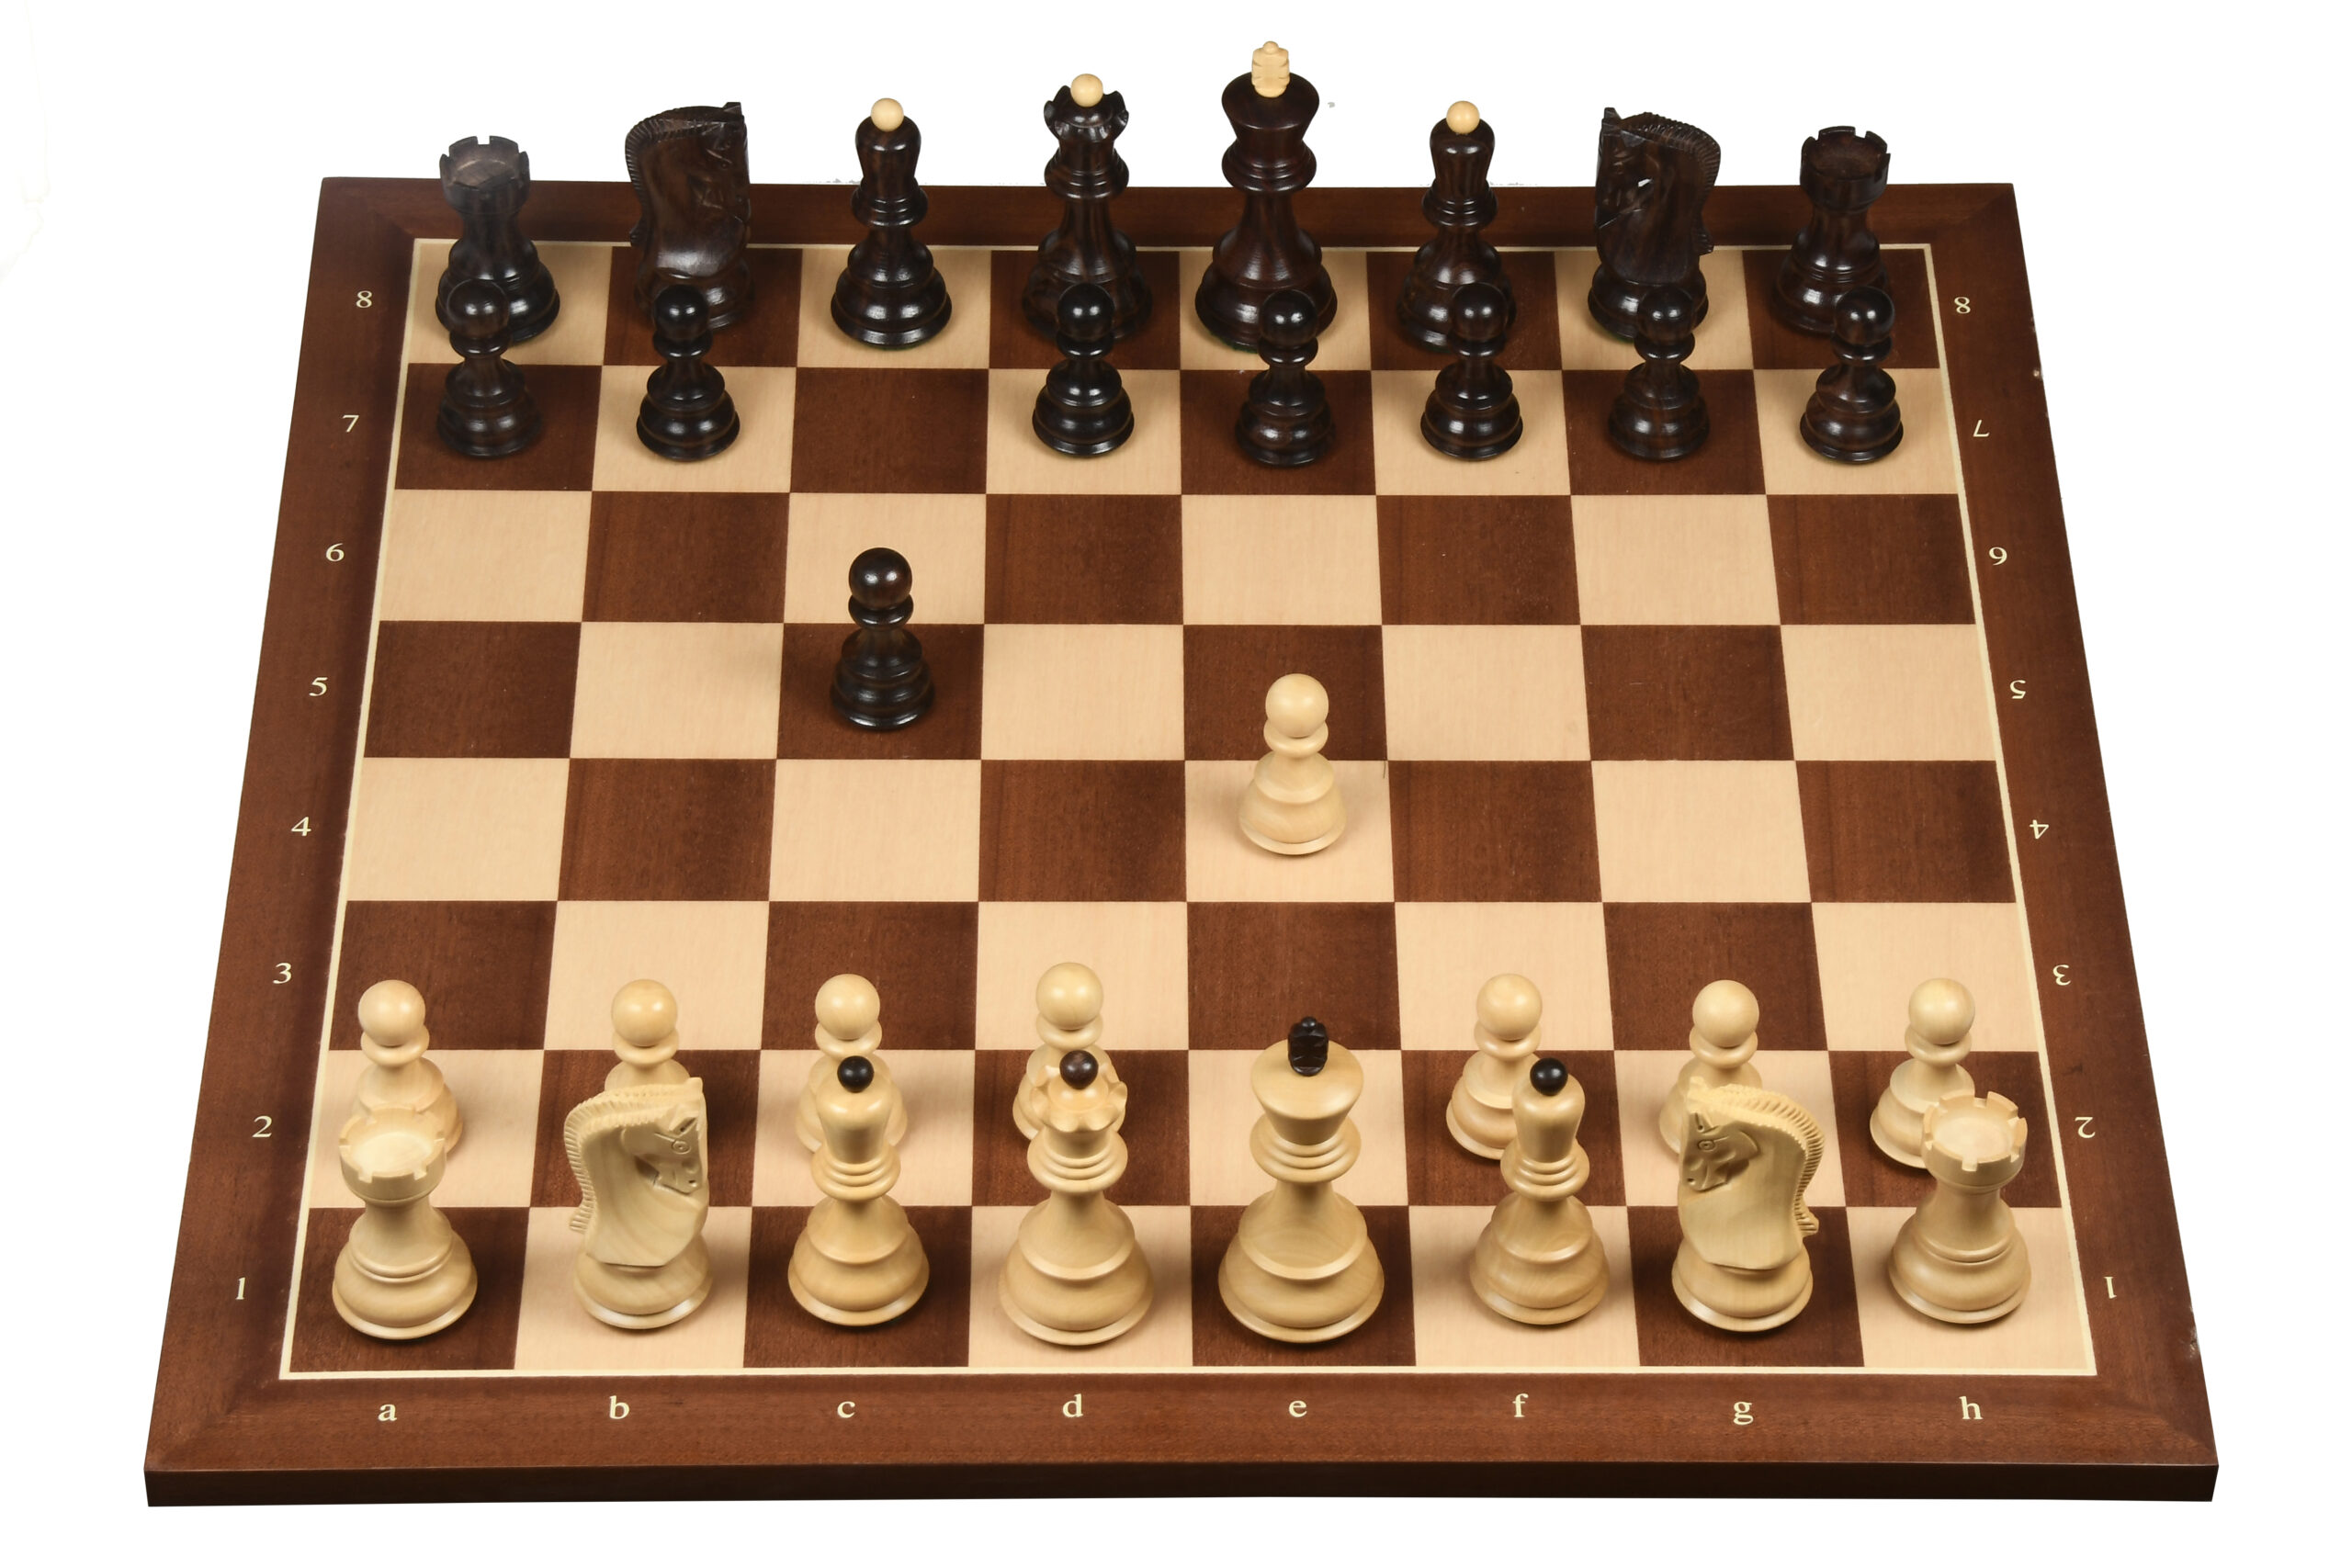 What's the best chess opening a beginner should play?